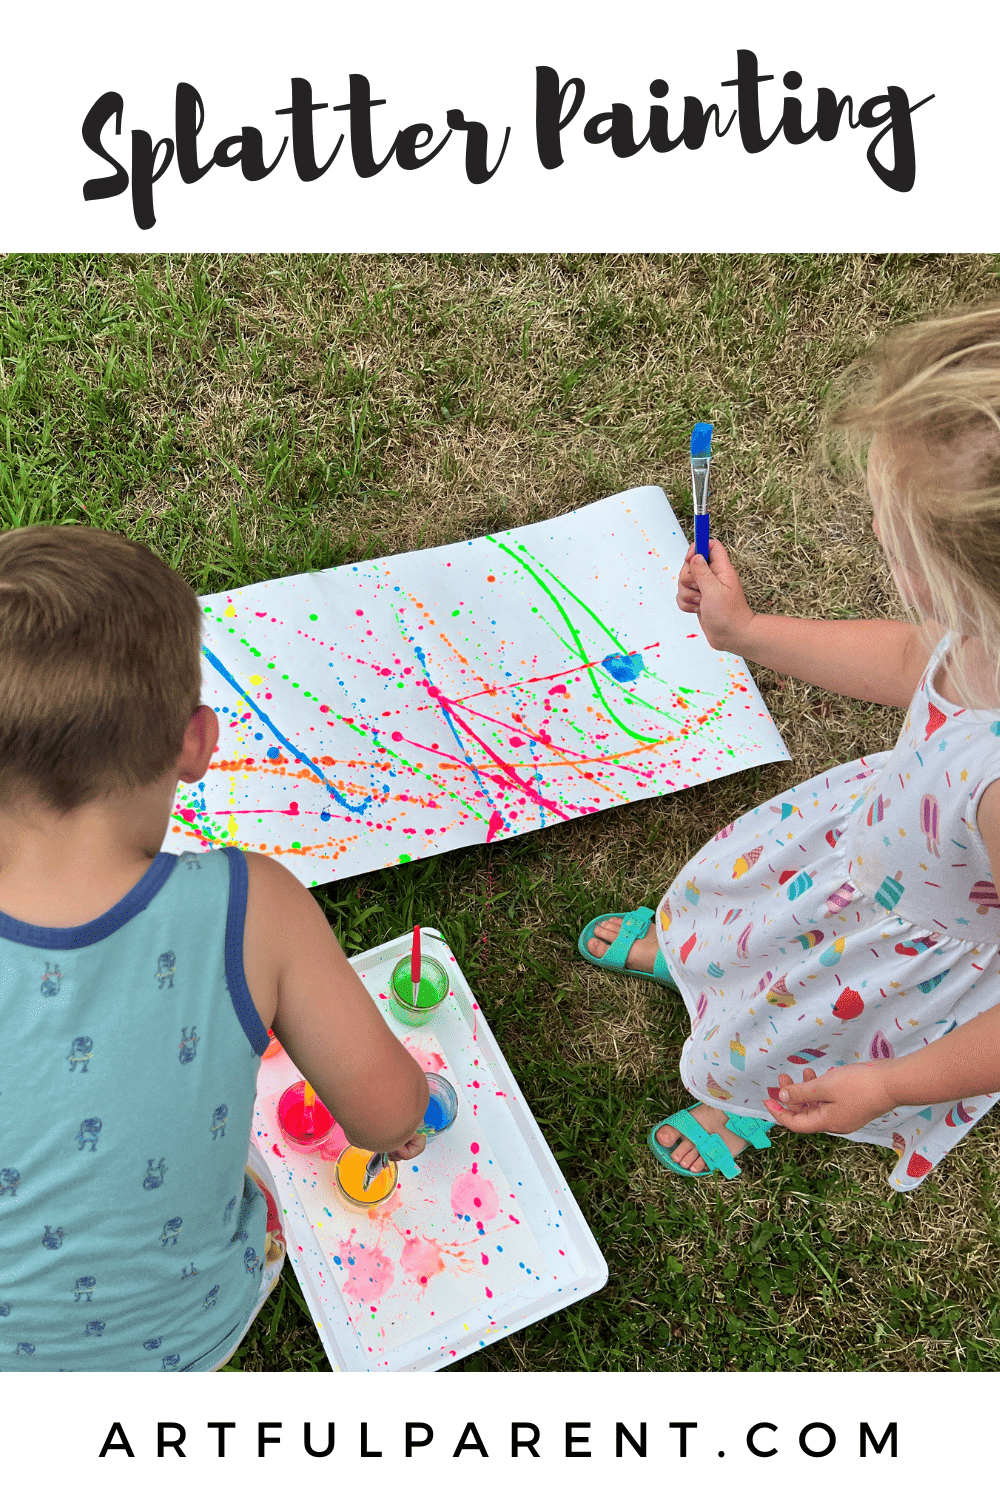 How to do Splatter Painting with Kids